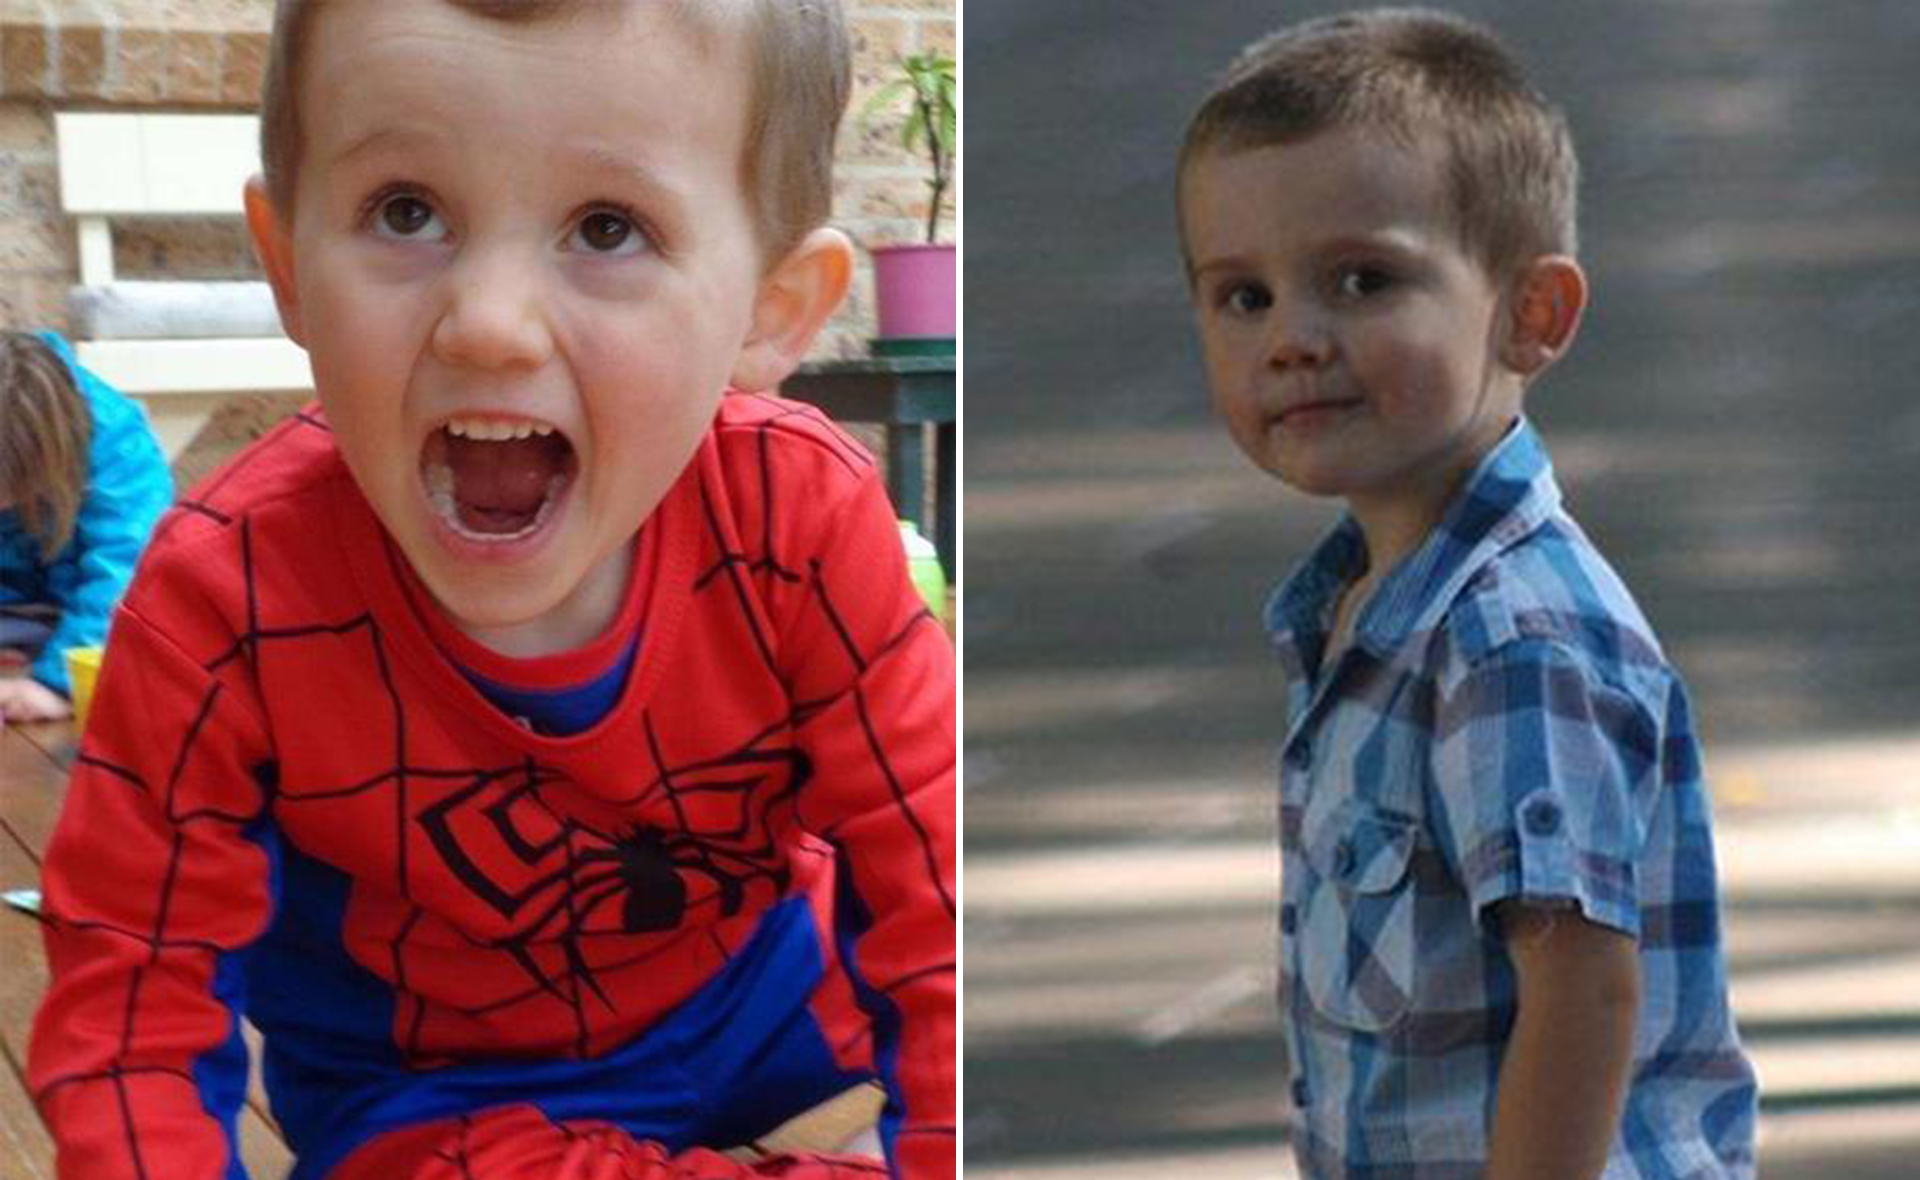 Who are William Tyrrell’s foster parents? New developments in his disappearance shine a light on the couple